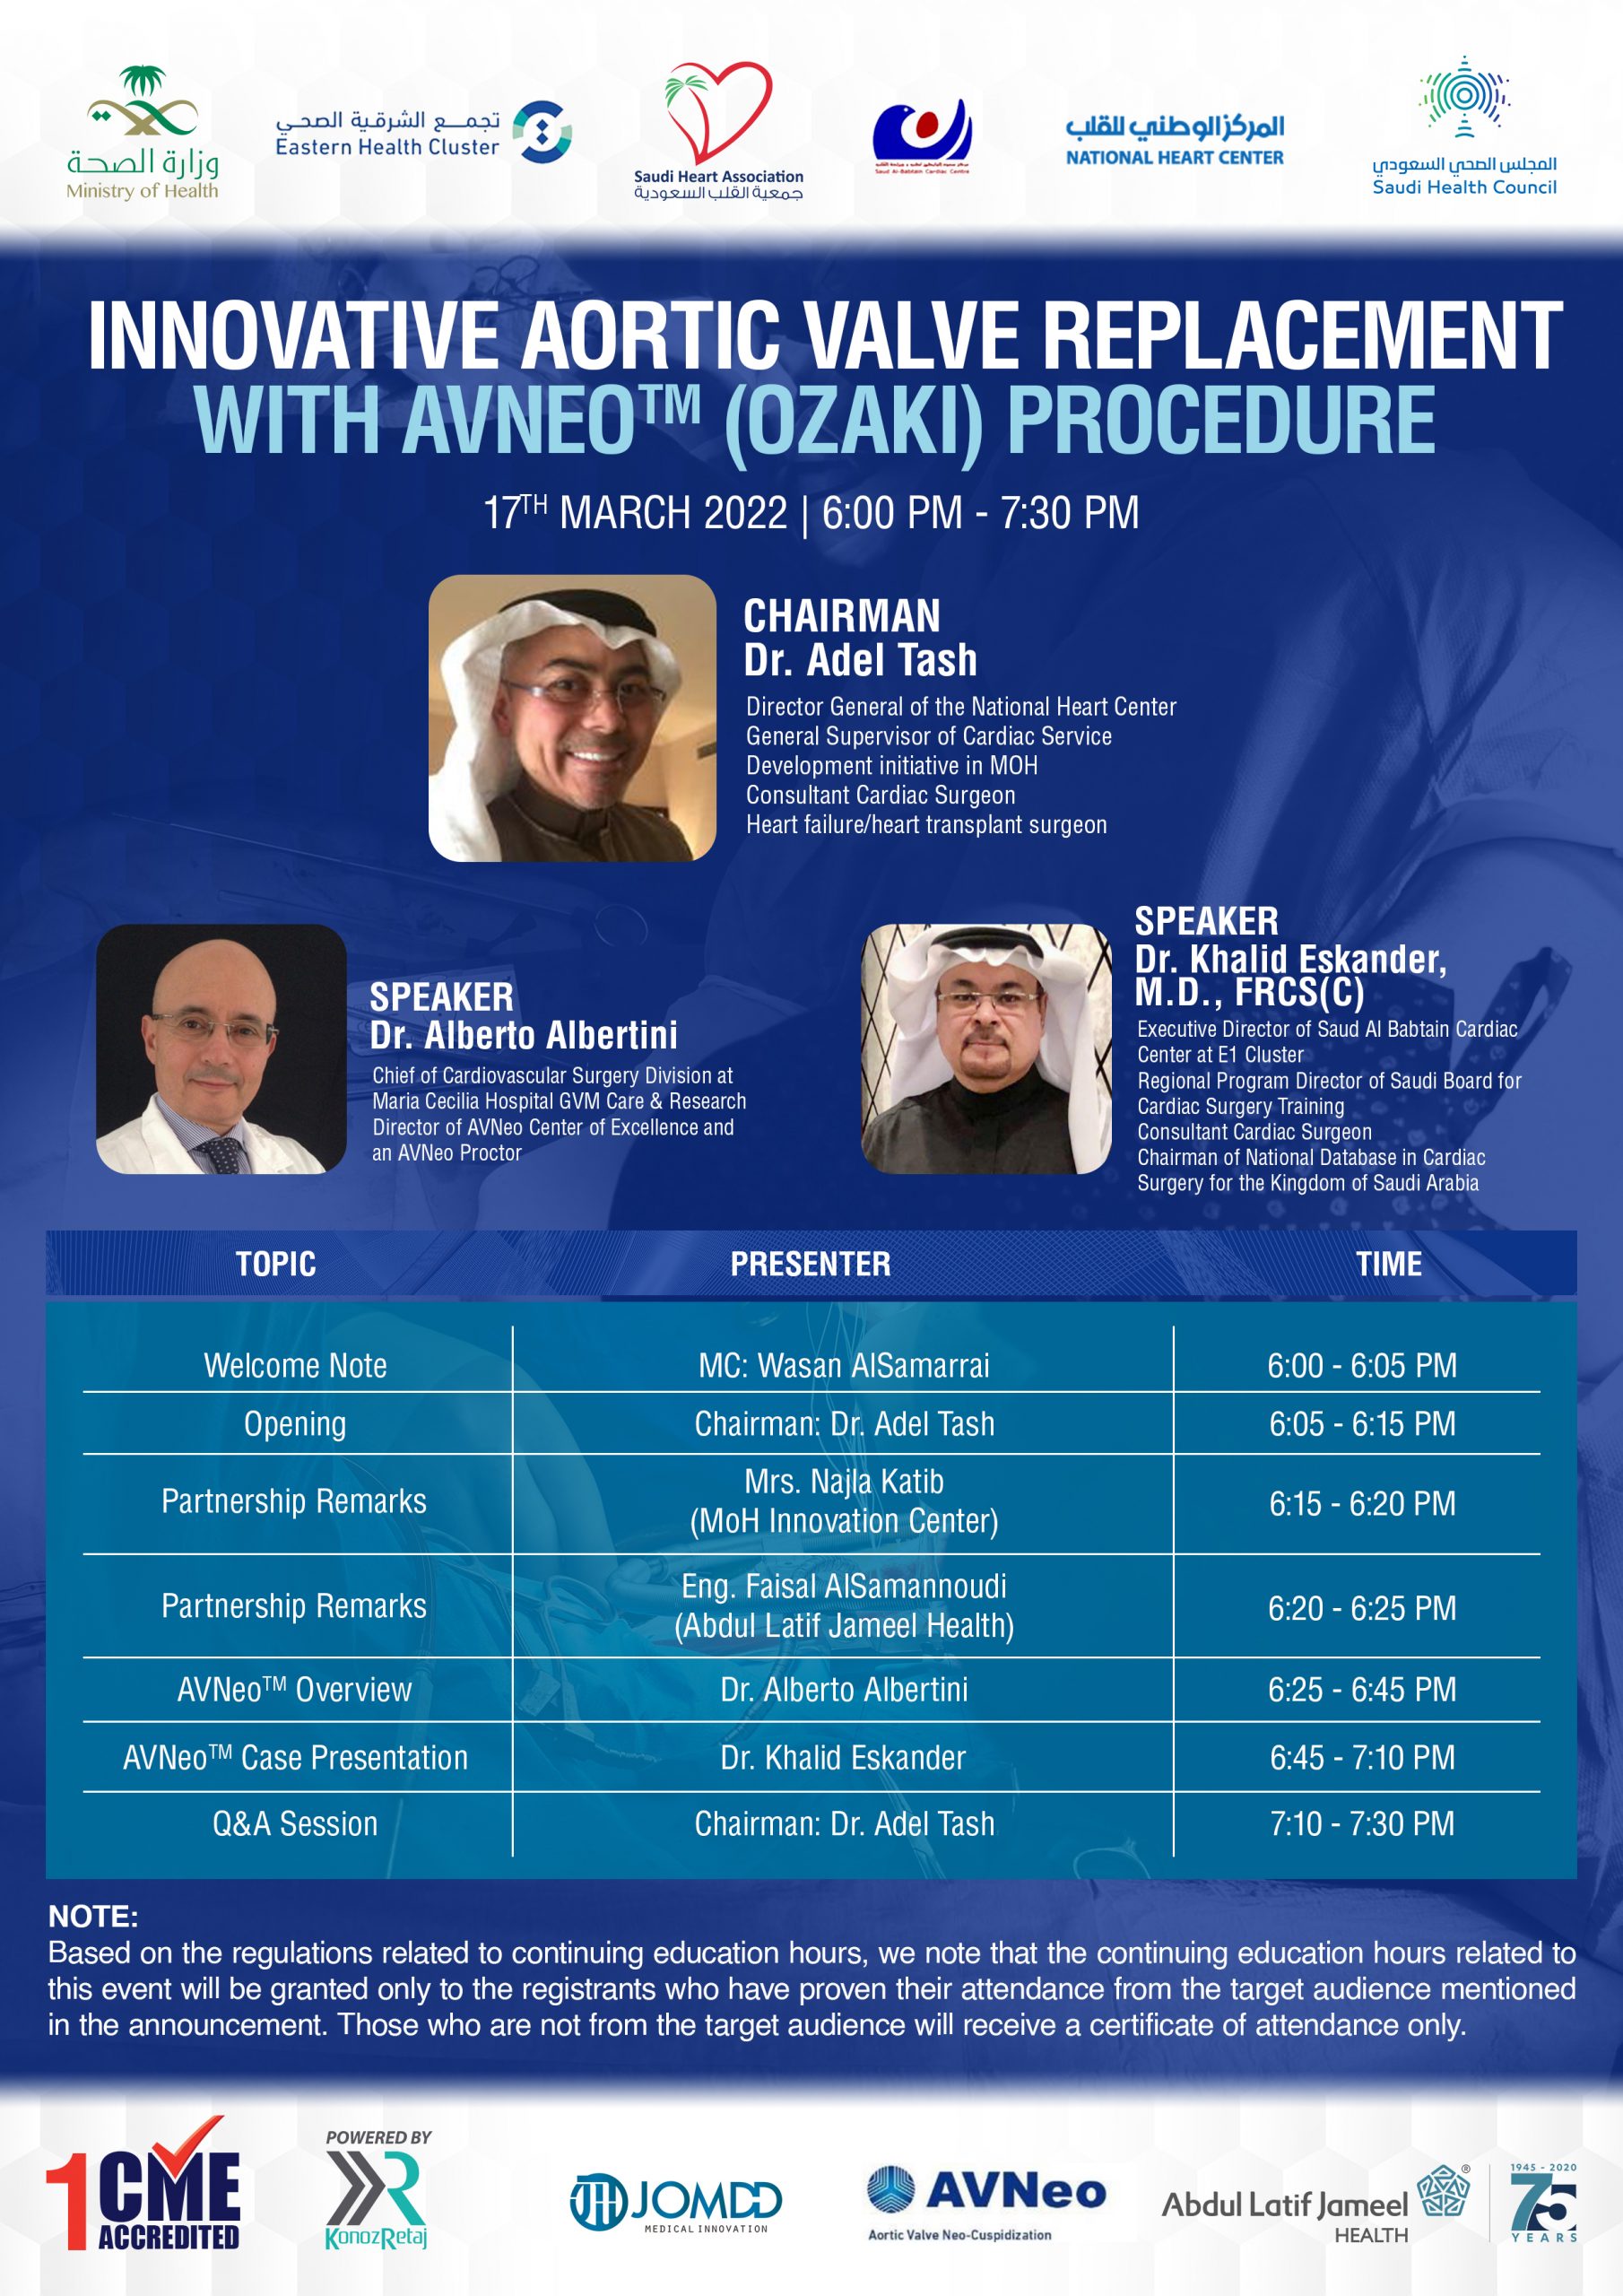 INNOVATIVE AORTIC VALVE REPLACEMENT WITH ANVEO (OZAKI) PROCEDURE – March 17, 2022